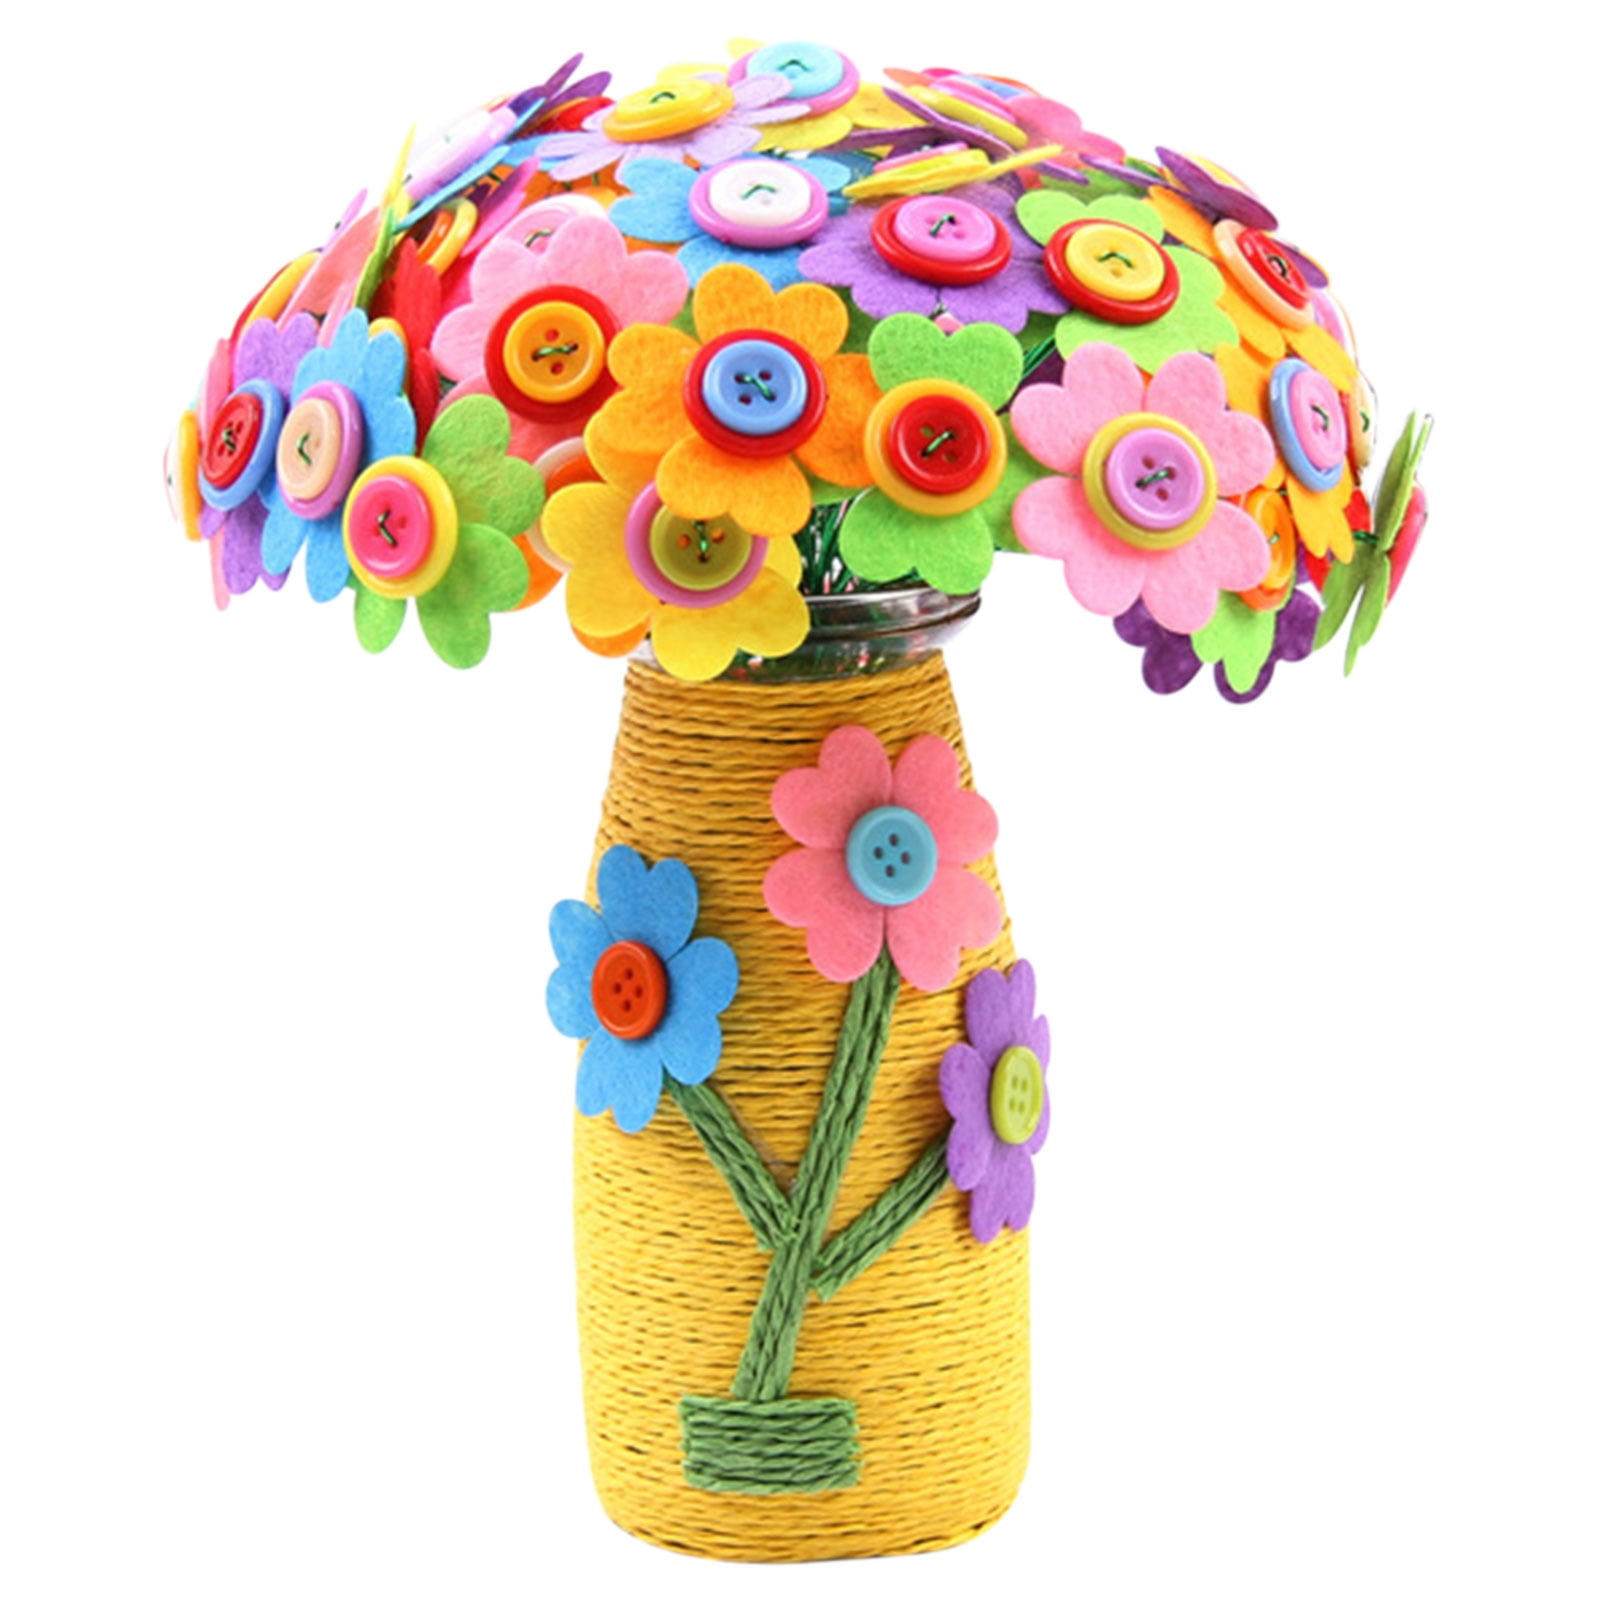 DigHealth DIY Vase with Flowers Craft Kit for Kids, Make Your Own Flower  Bouquet by Buttons and Fabric, Crafts and Art Set Gift for Girls Boys Age 4  5 6 7 8 9 10 12 Years Old 